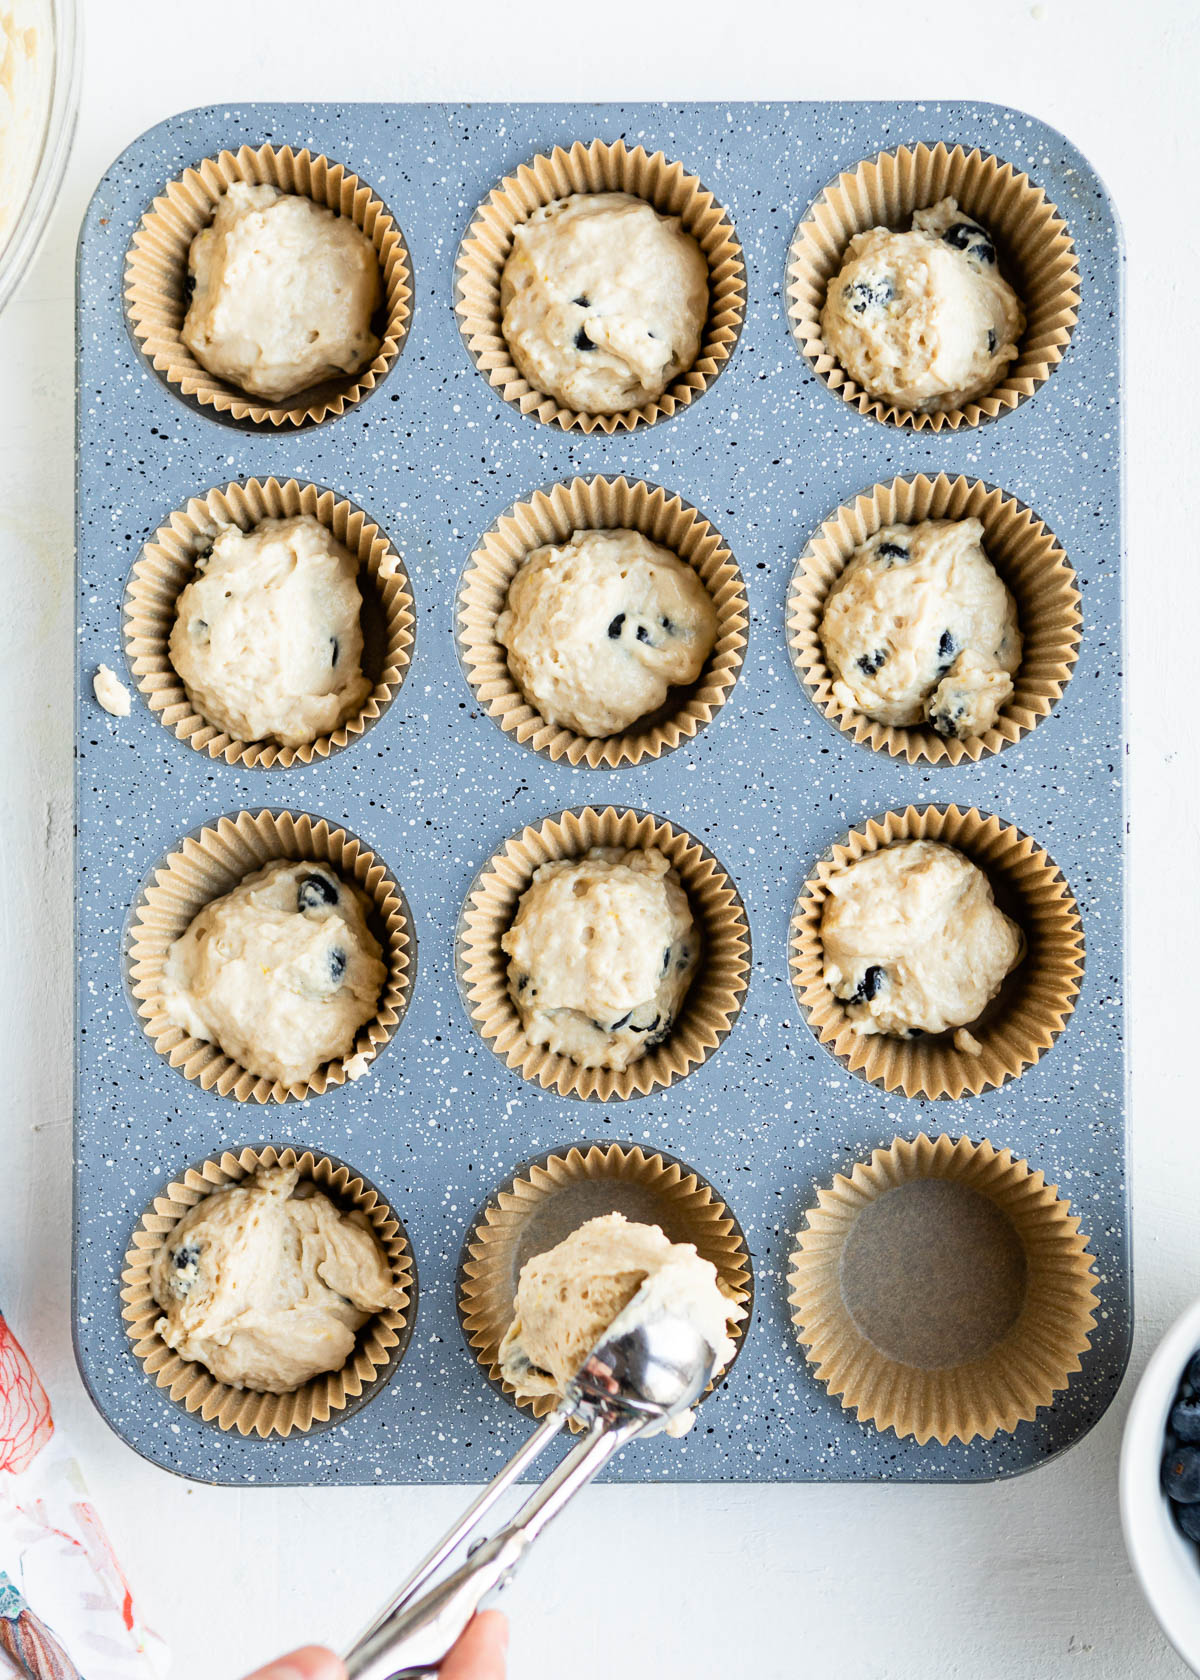 using a metal scoop to put vegan blueberry muffin batter into lined muffin tins.